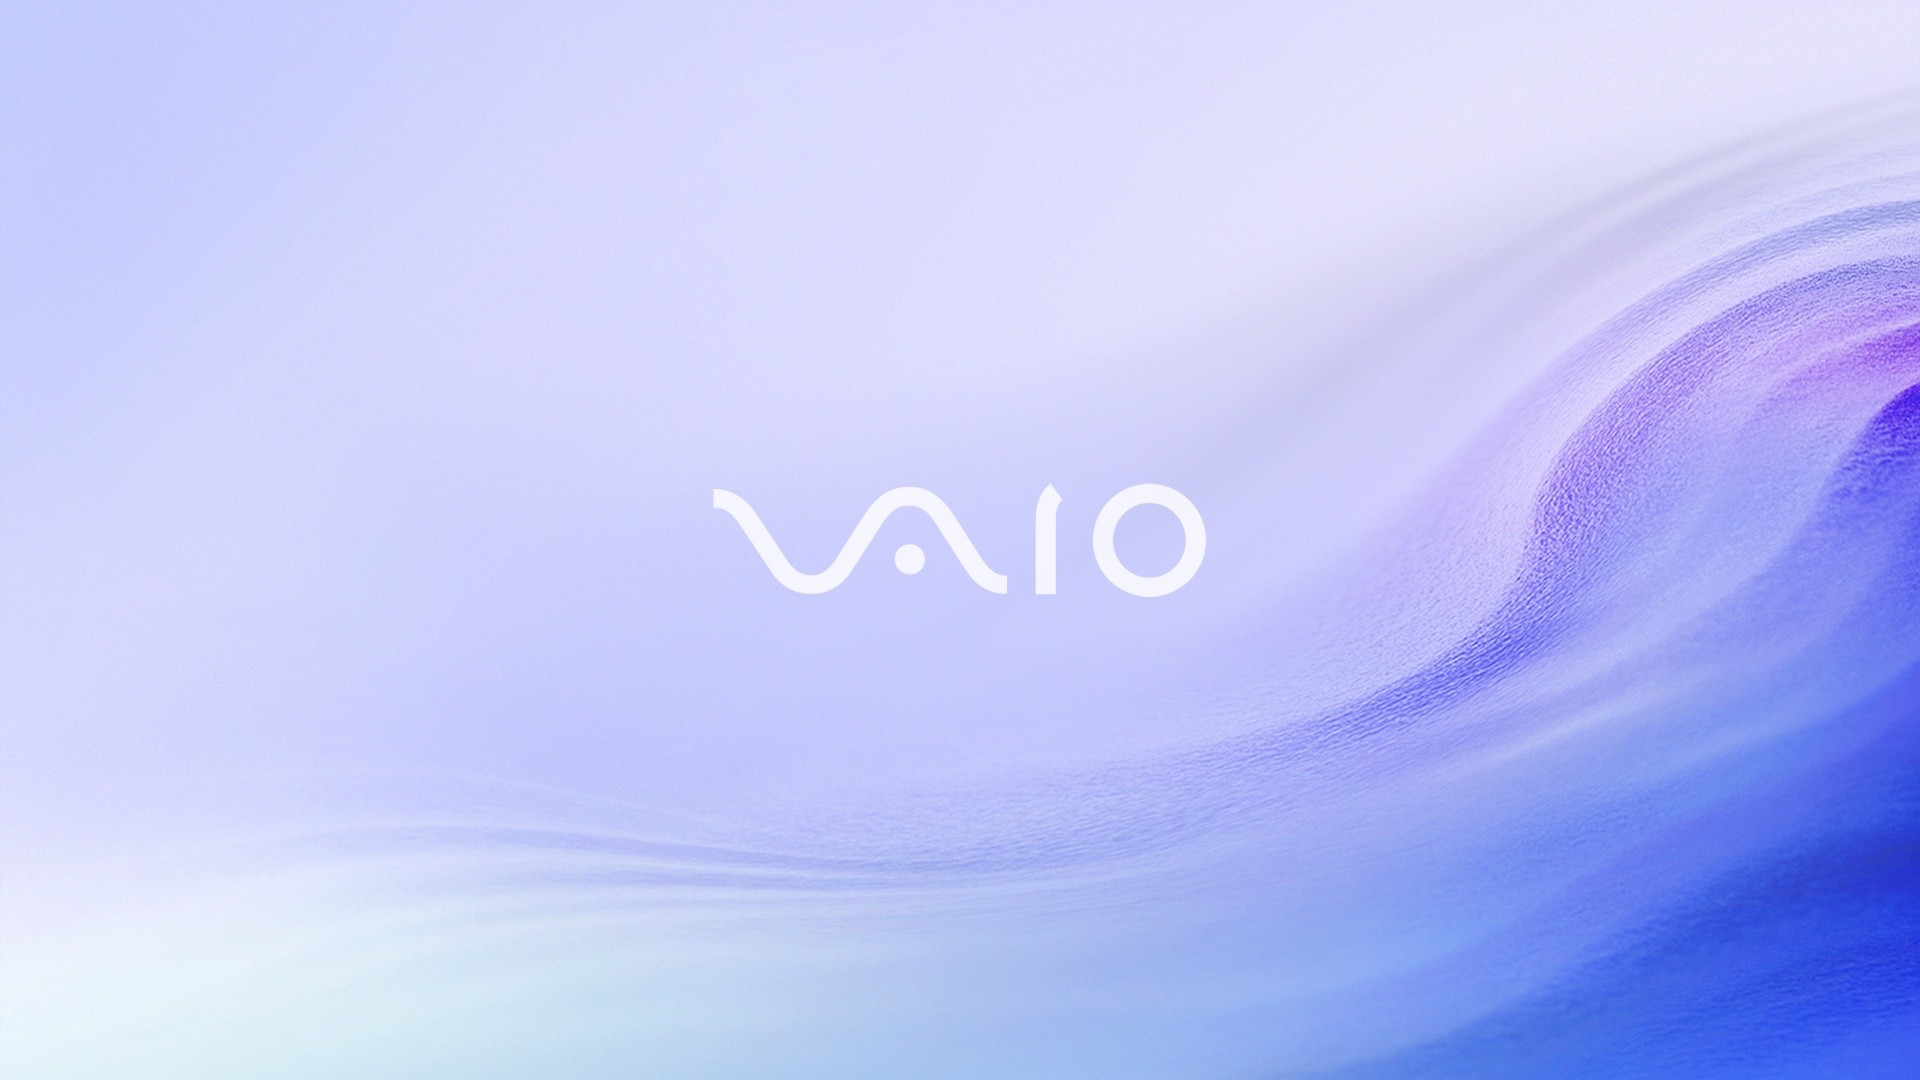 1920x1080  Vaio Light Blue. How to set wallpaper on your desktop? Click the  download link from above and set the wallpaper on the desktop from your OS.